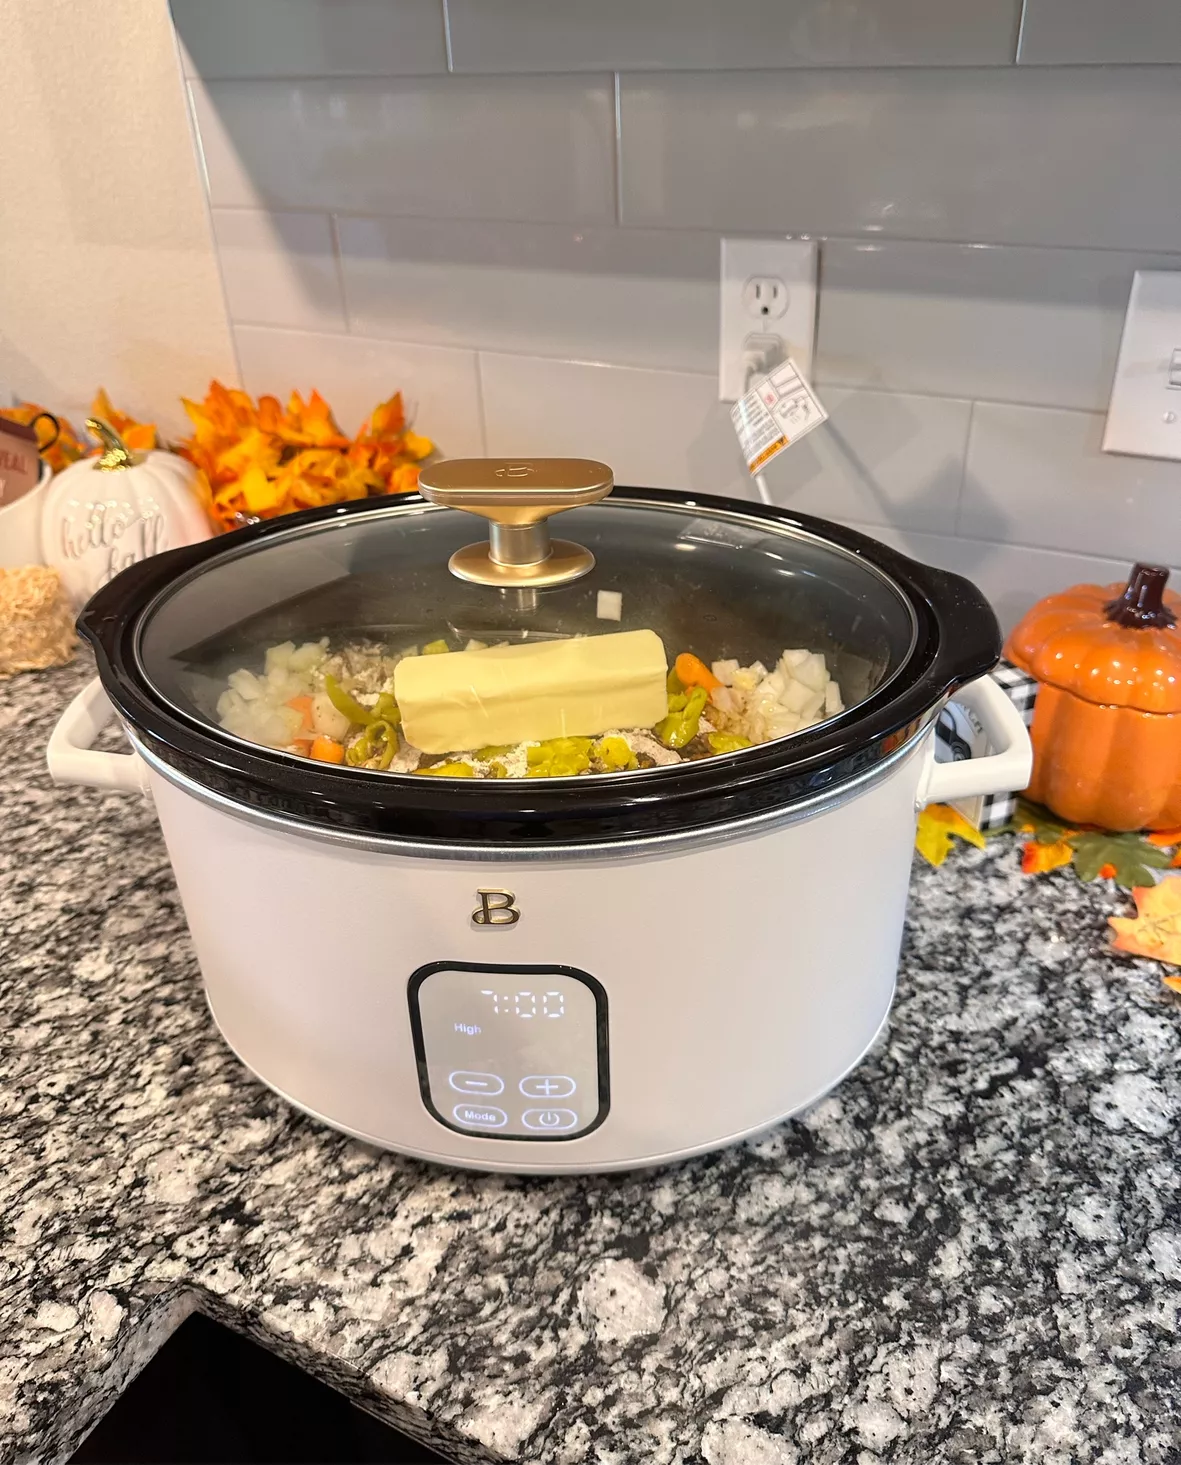 Beautiful 6 Qt Programmable Slow Cooker, White Icing by Drew